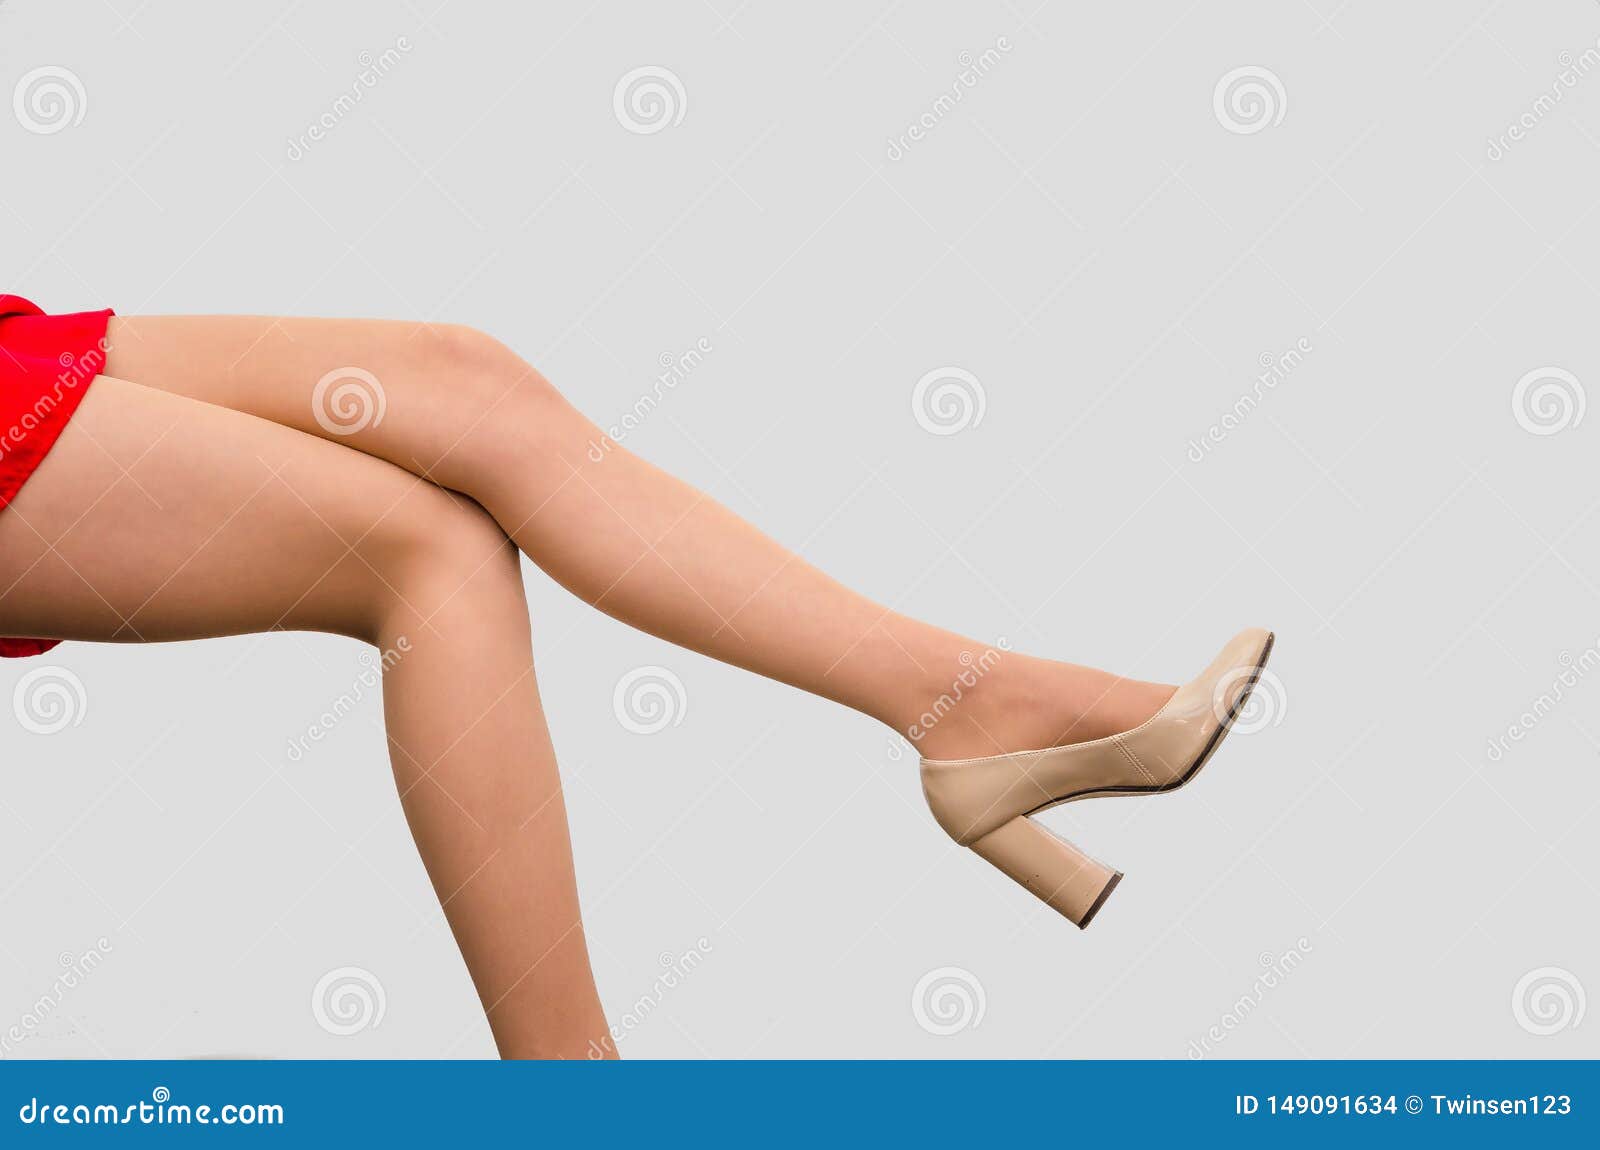 slender legs of a woman sitting on a chair. sexuality, seduction, women`s health